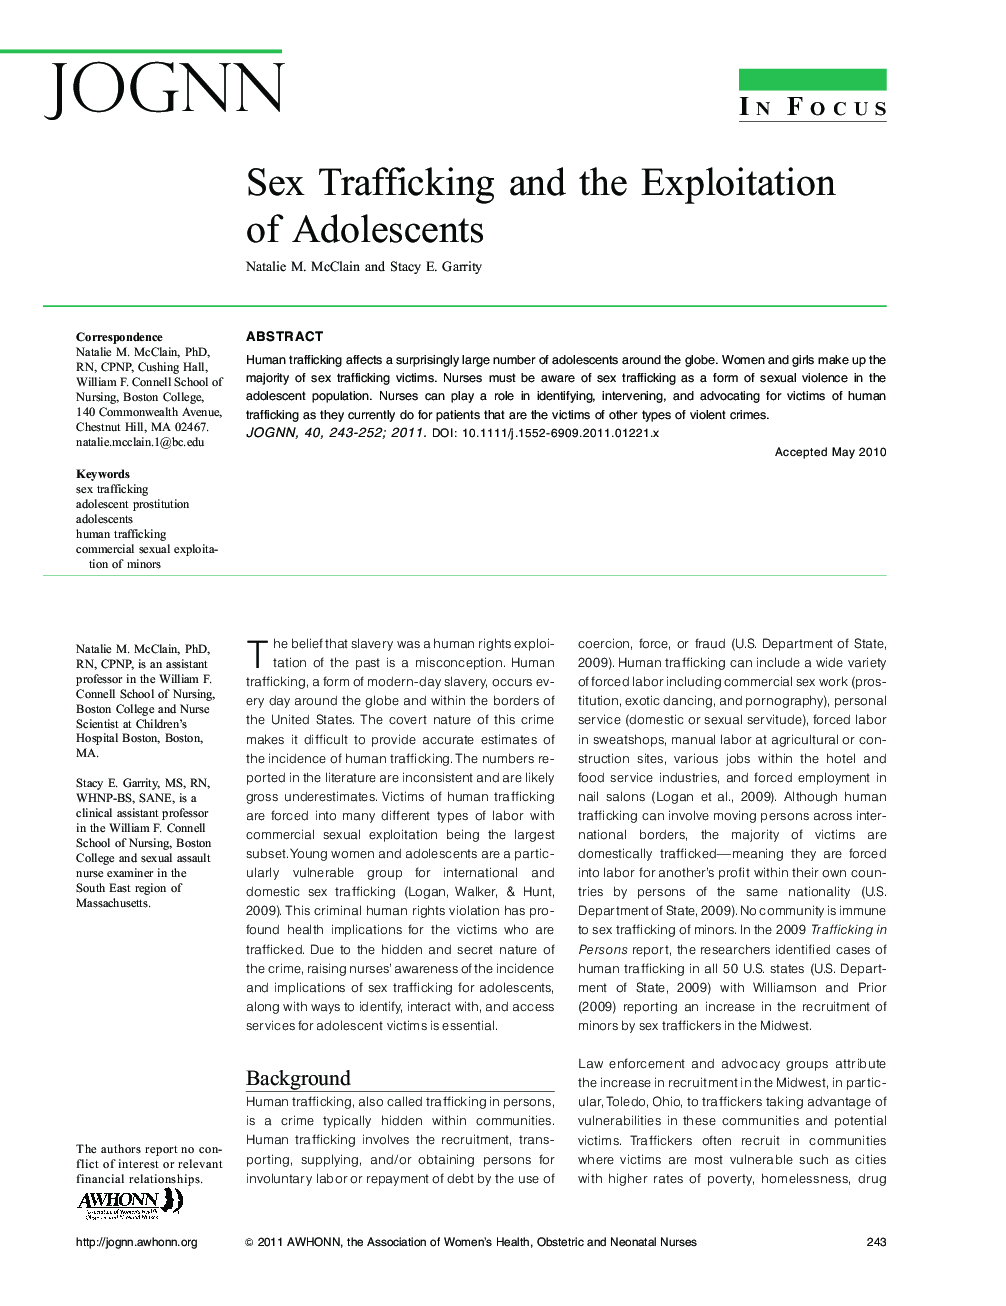 Sex Trafficking and the Exploitation of Adolescents